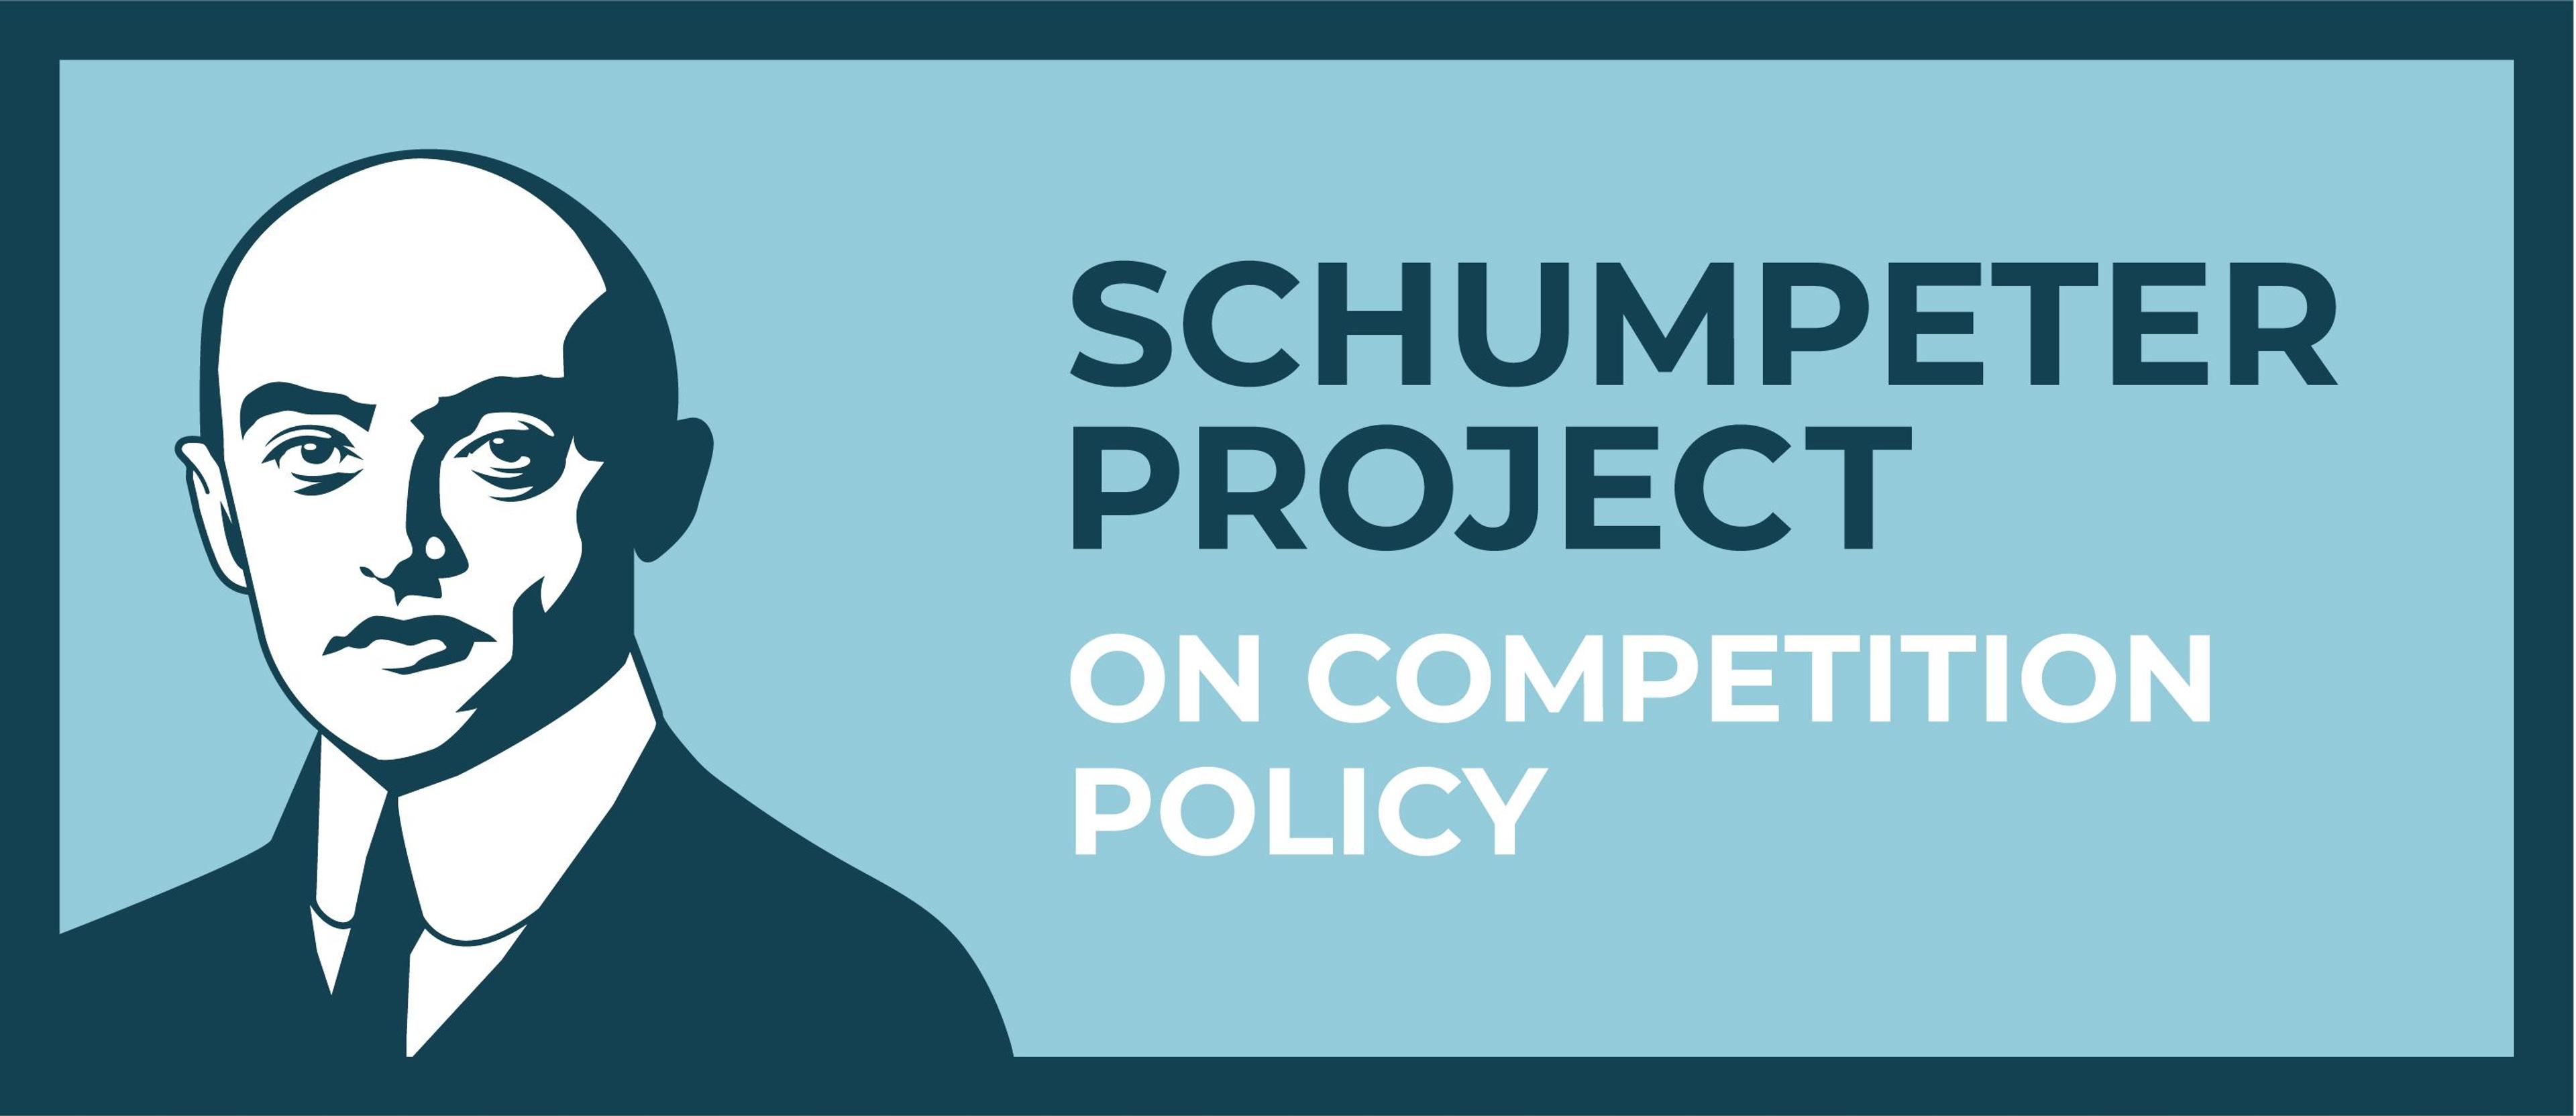 Schumpeter Project on Competition Policy